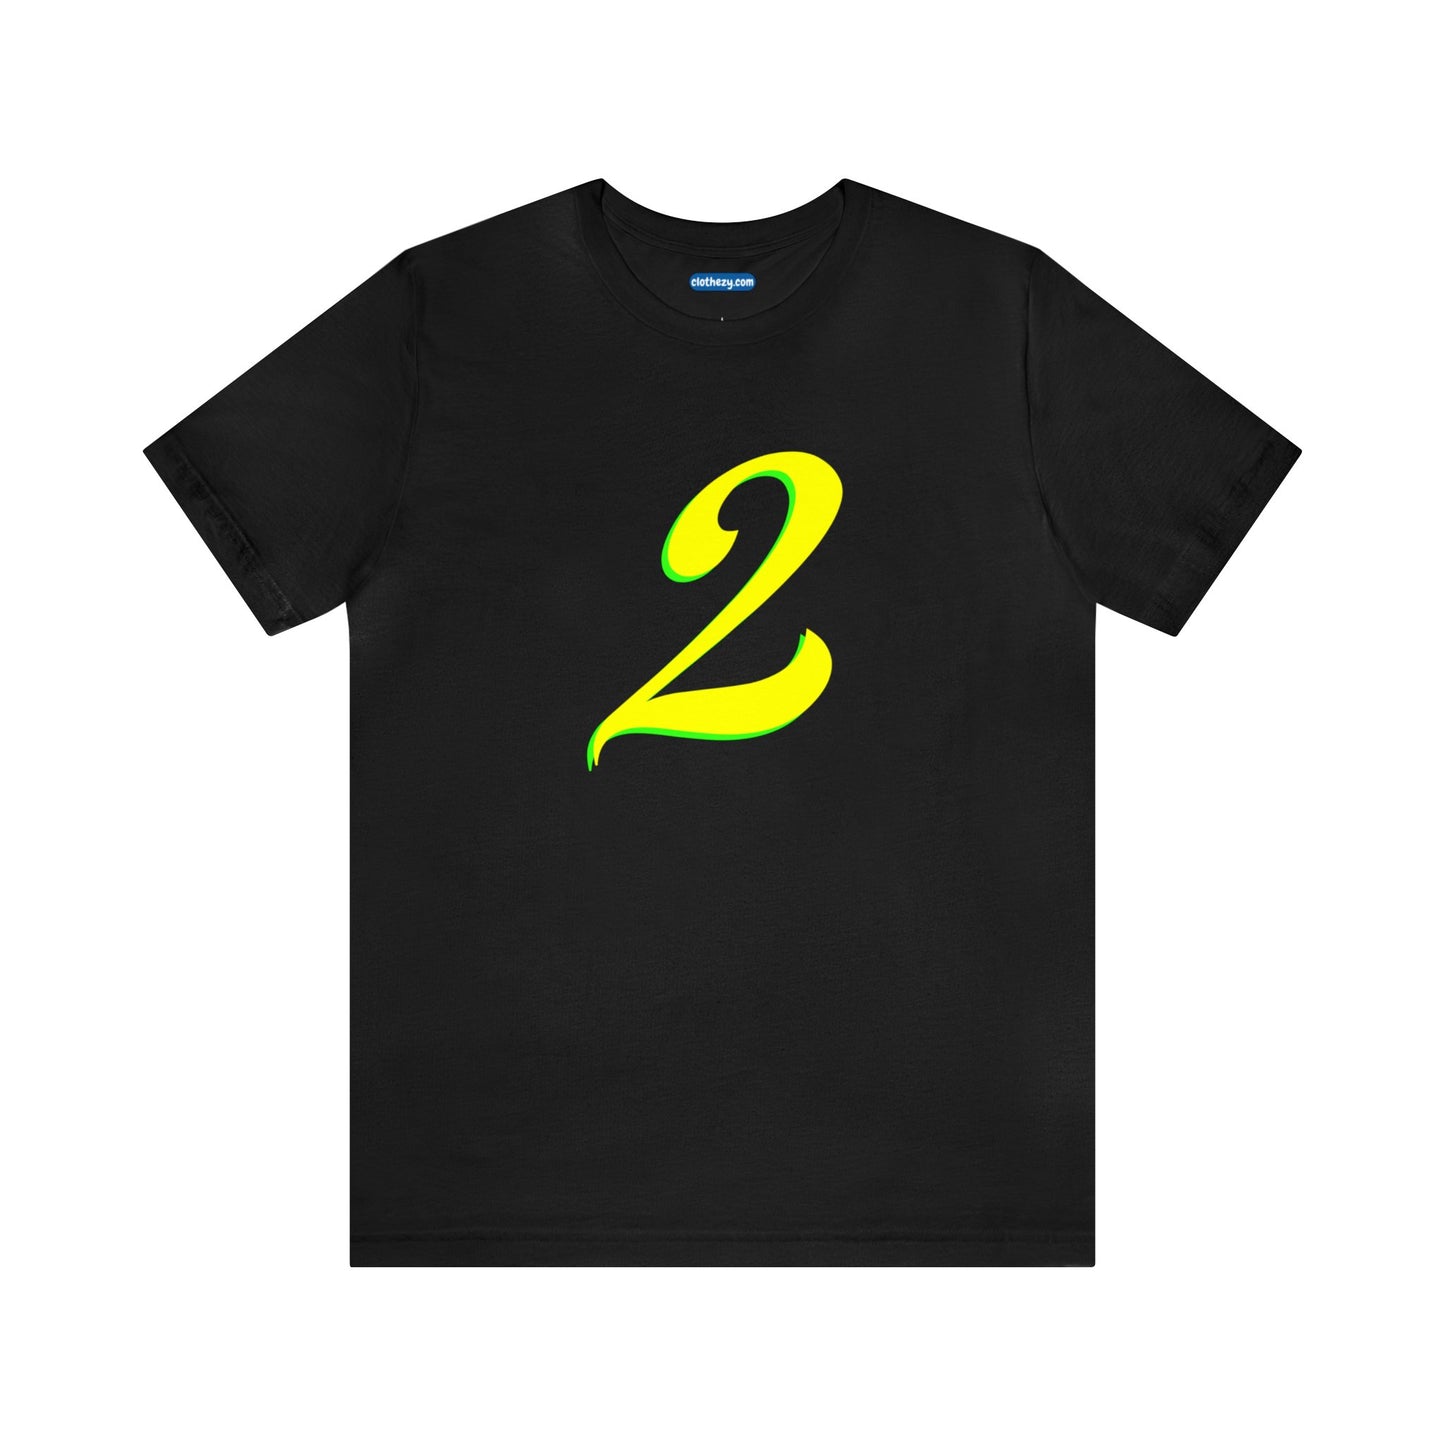 Number 2 Design - Soft Cotton Tee for birthdays and celebrations, Gift for friends and family, Multiple Options by clothezy.com in Dark Grey Heather Size Small - Buy Now